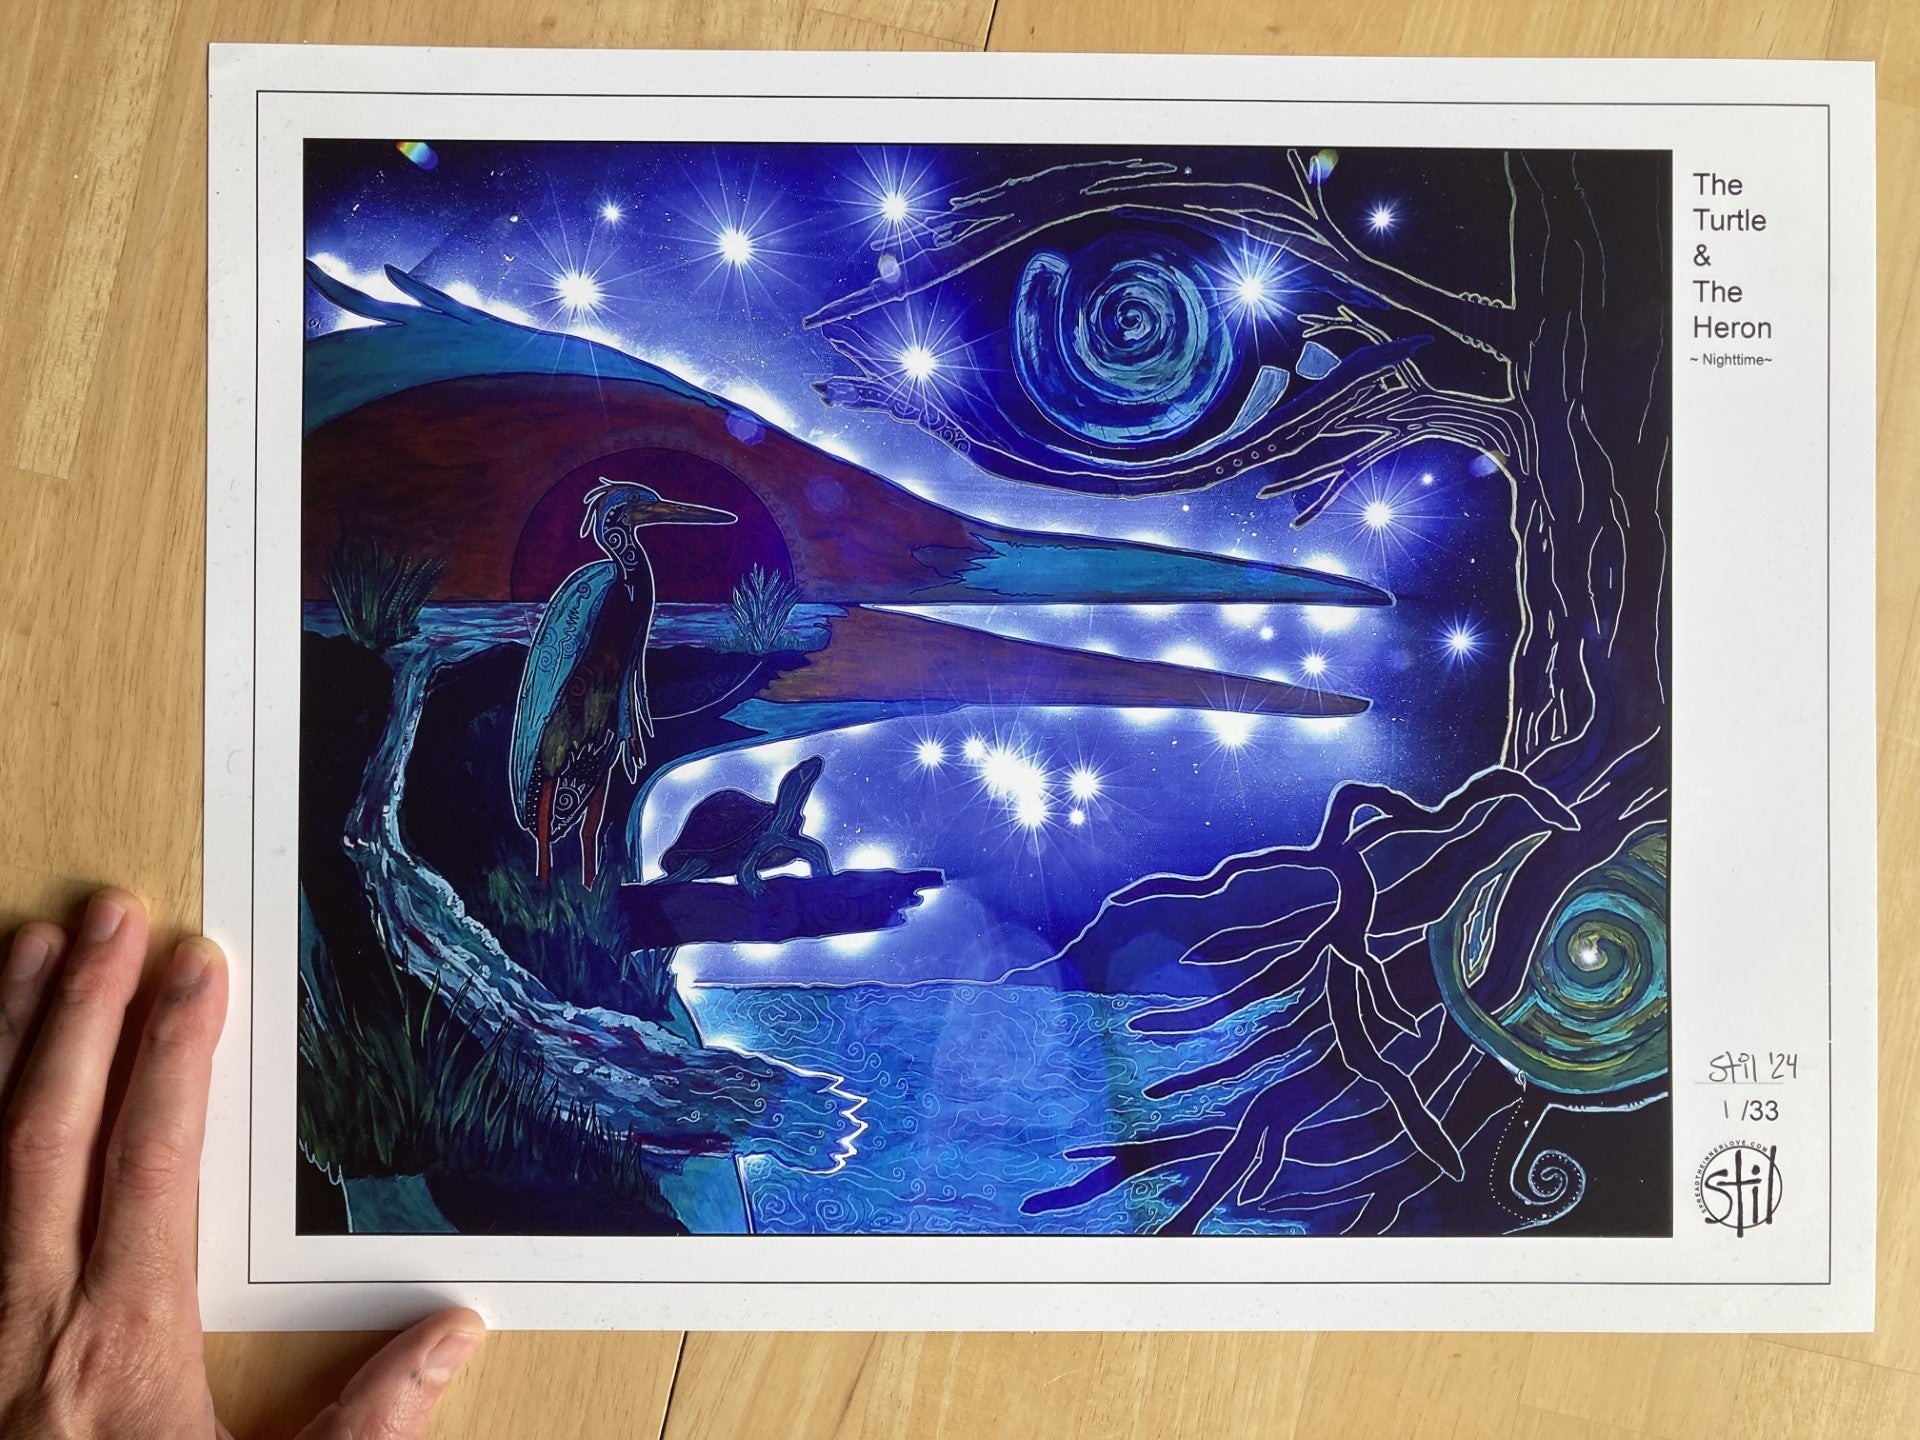 The Turtle & The Heron (Limited Edition Prints) - 29 of 33 available -